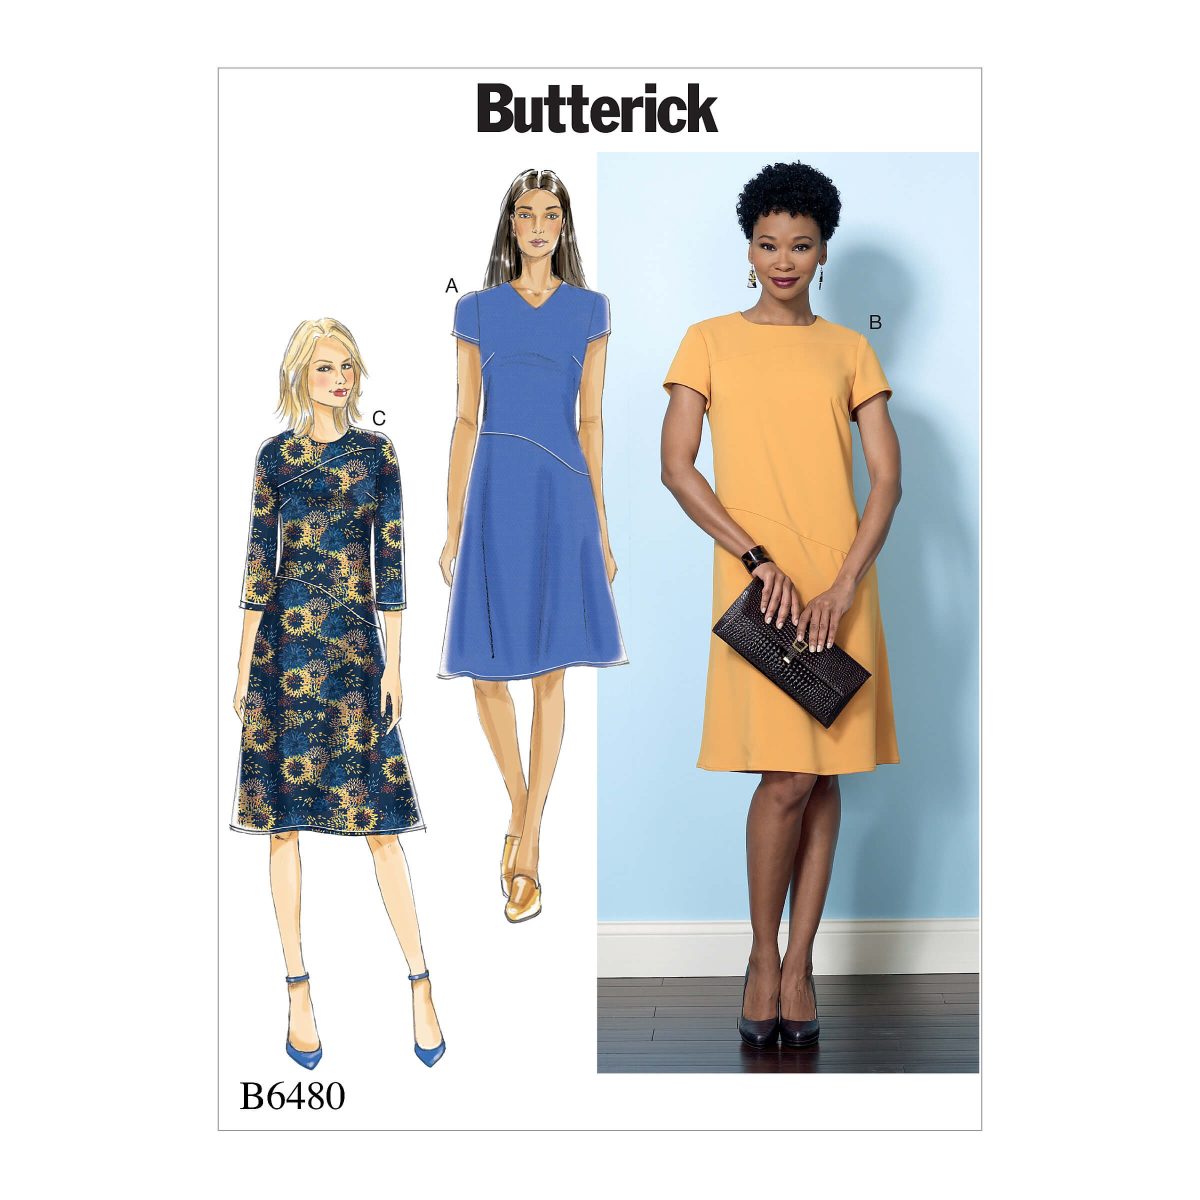 Butterick Sewing Pattern B6480 Misses' Fitted Dresses with Hip Detail, Neck and Sleeve Variations